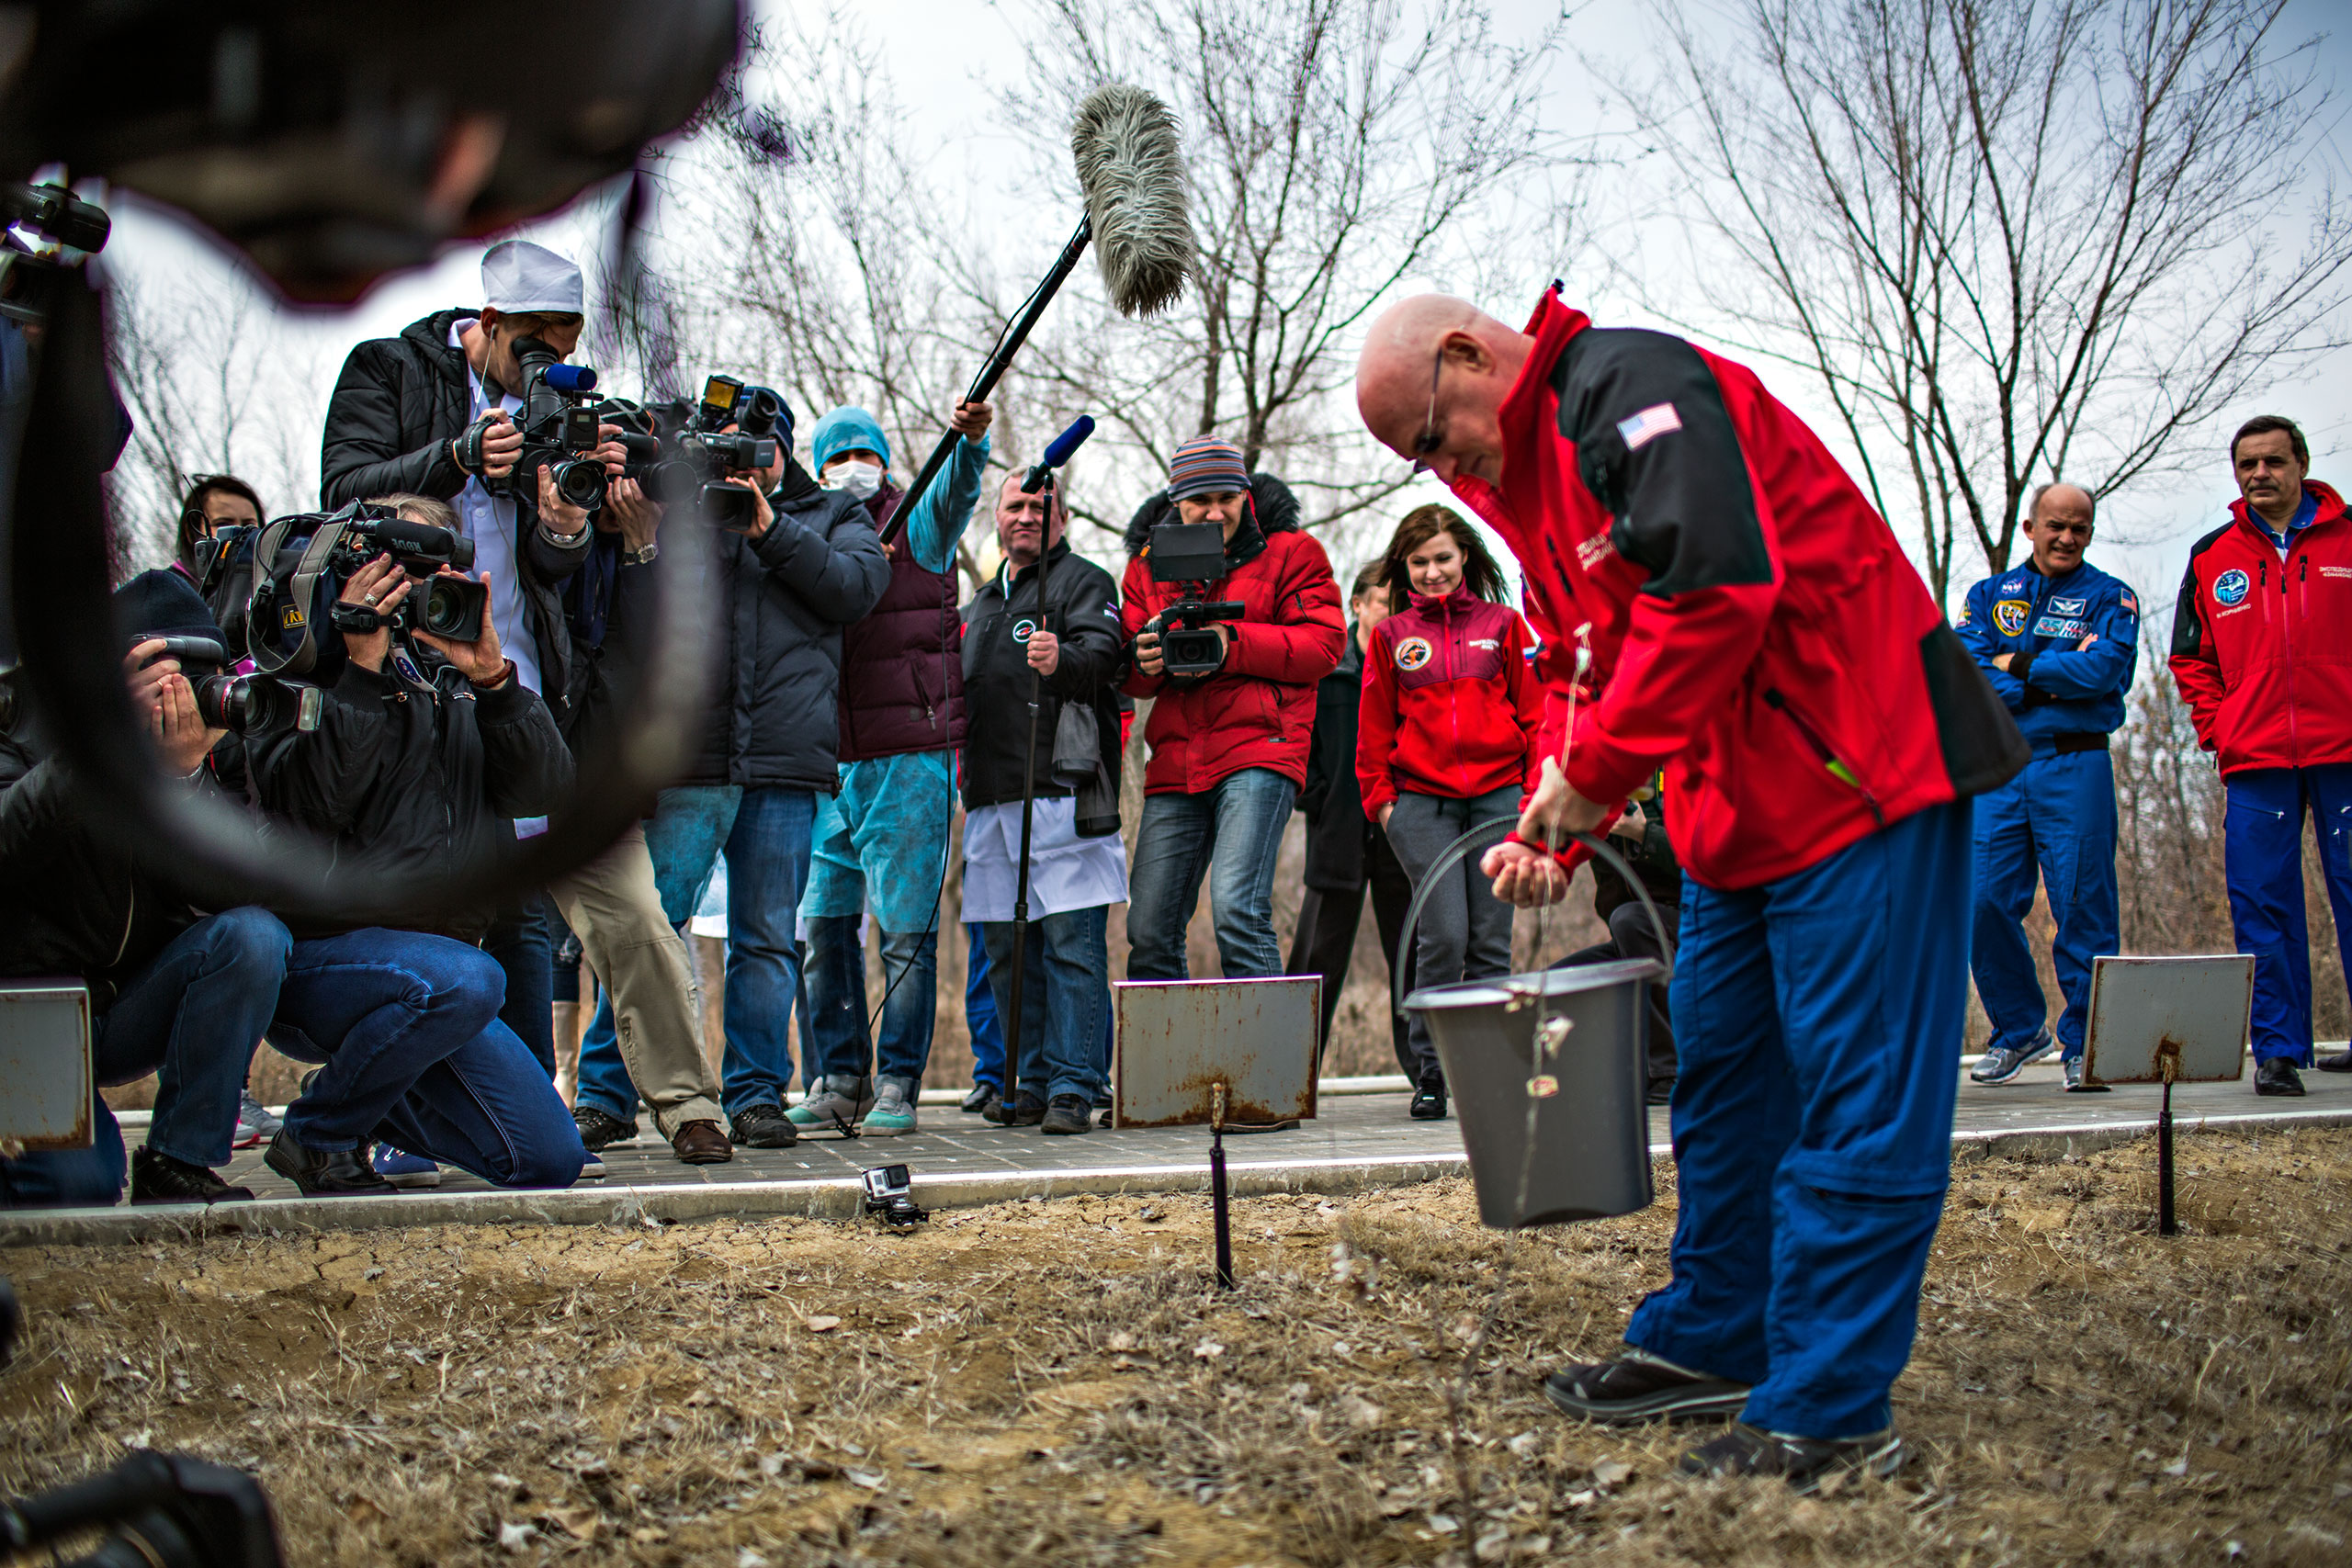 Scott Kelly waters the tree planted in his name in Baikonur, Kazhakstan on Saturday, March 21. (Jonathan D. Woods—TIME)